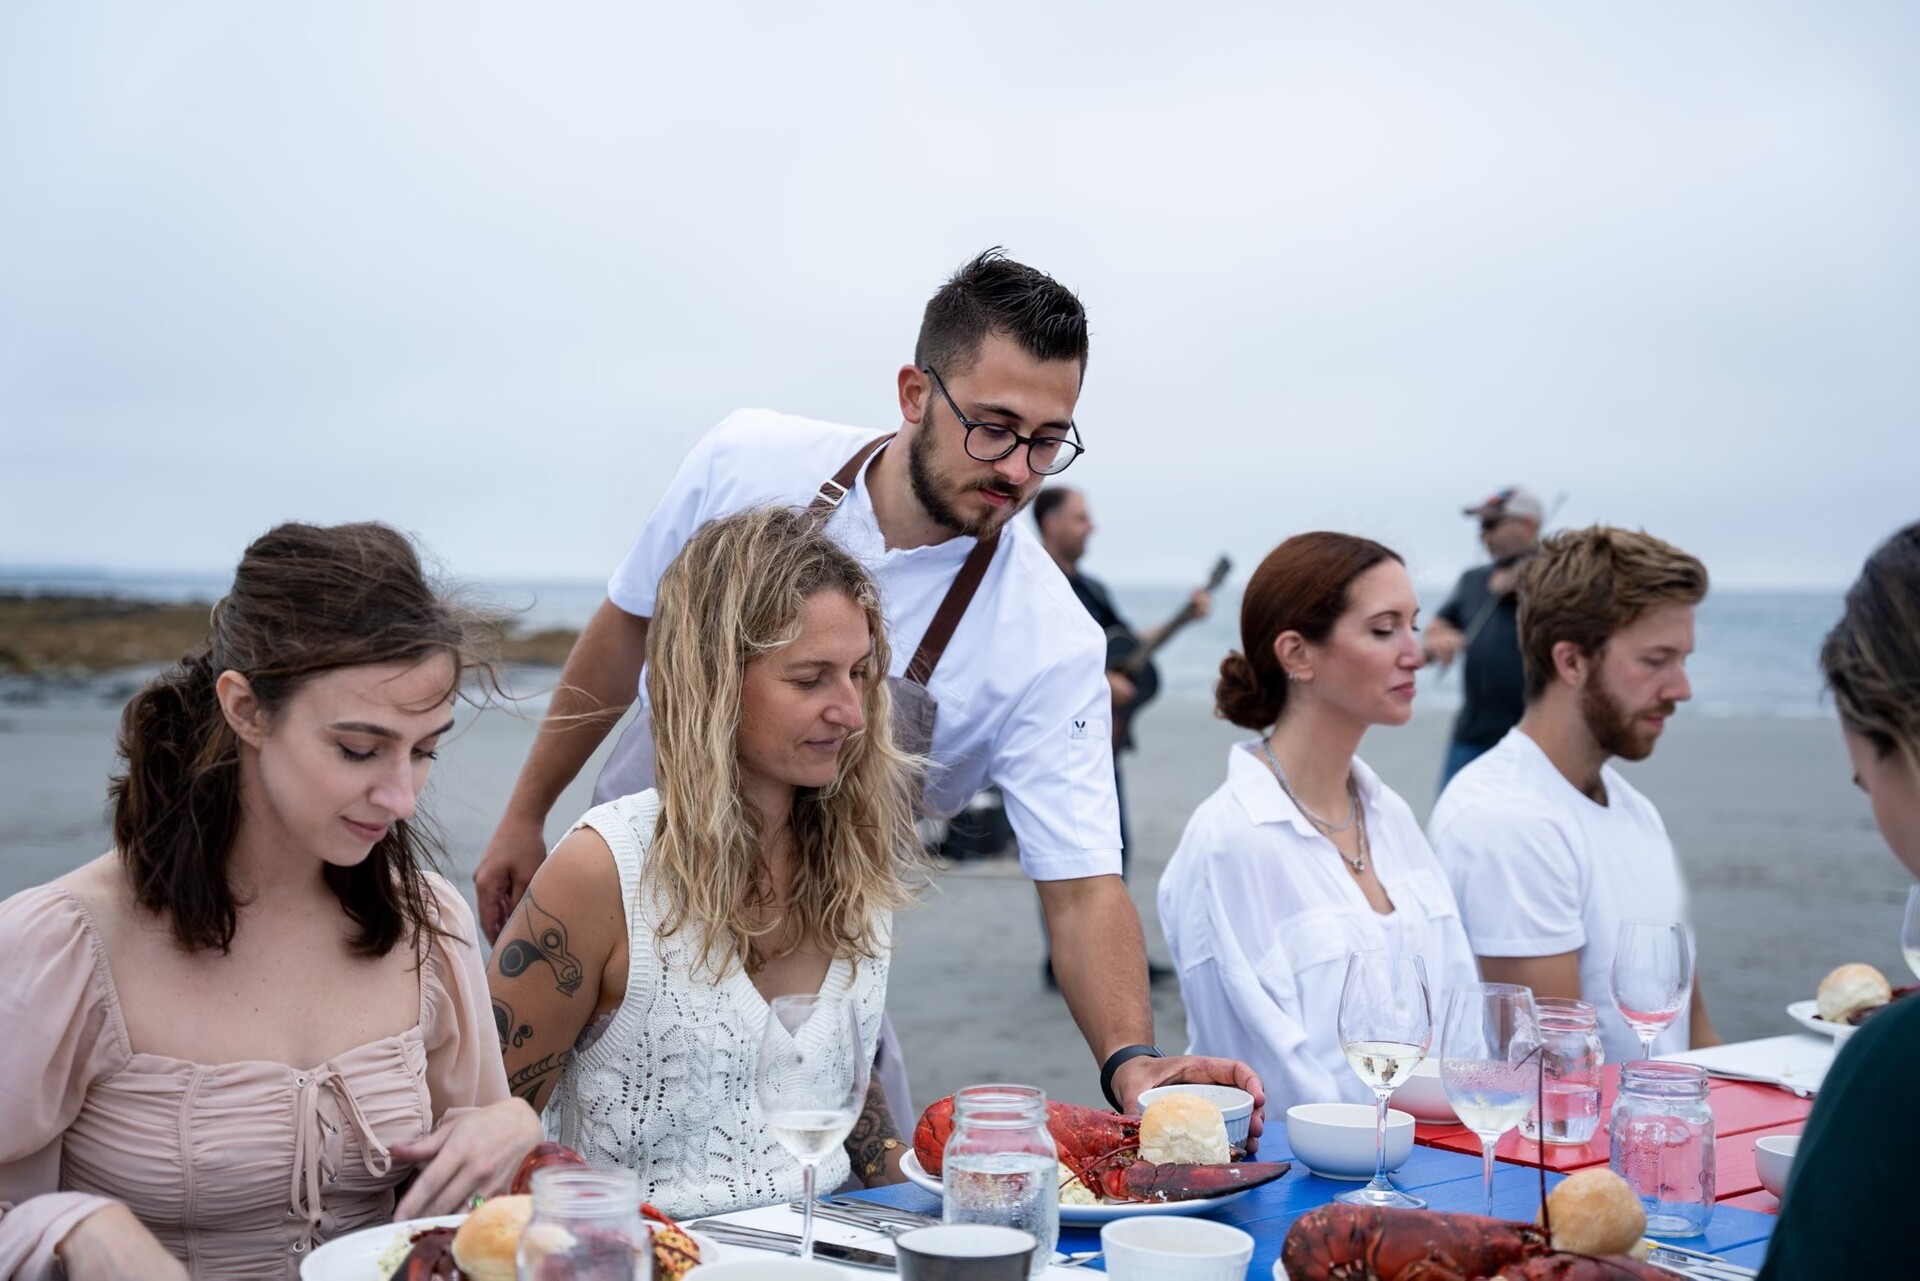 Shane Robicheau of Ptit Robicheau serves guests at a Dine on the Ocean Floor event.